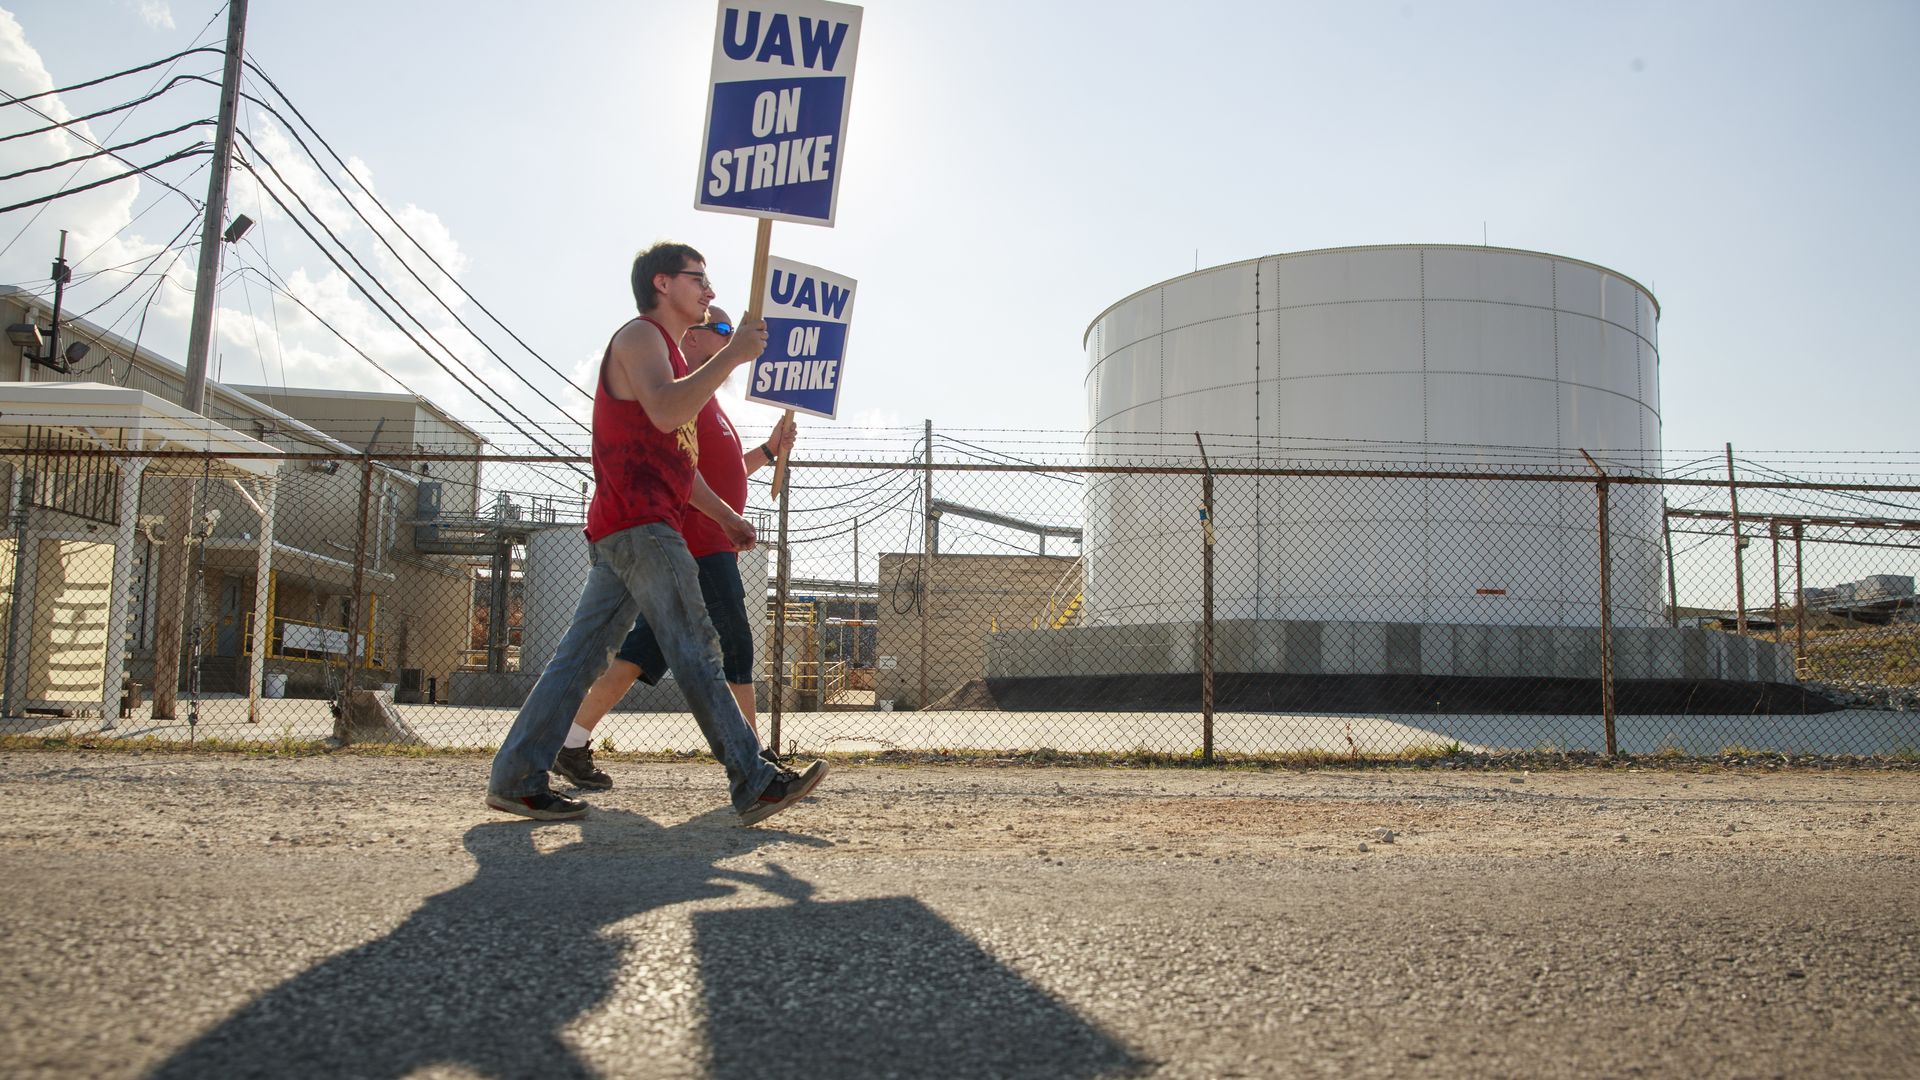 Workers from United Auto Workers picket during national labor strike against GM.